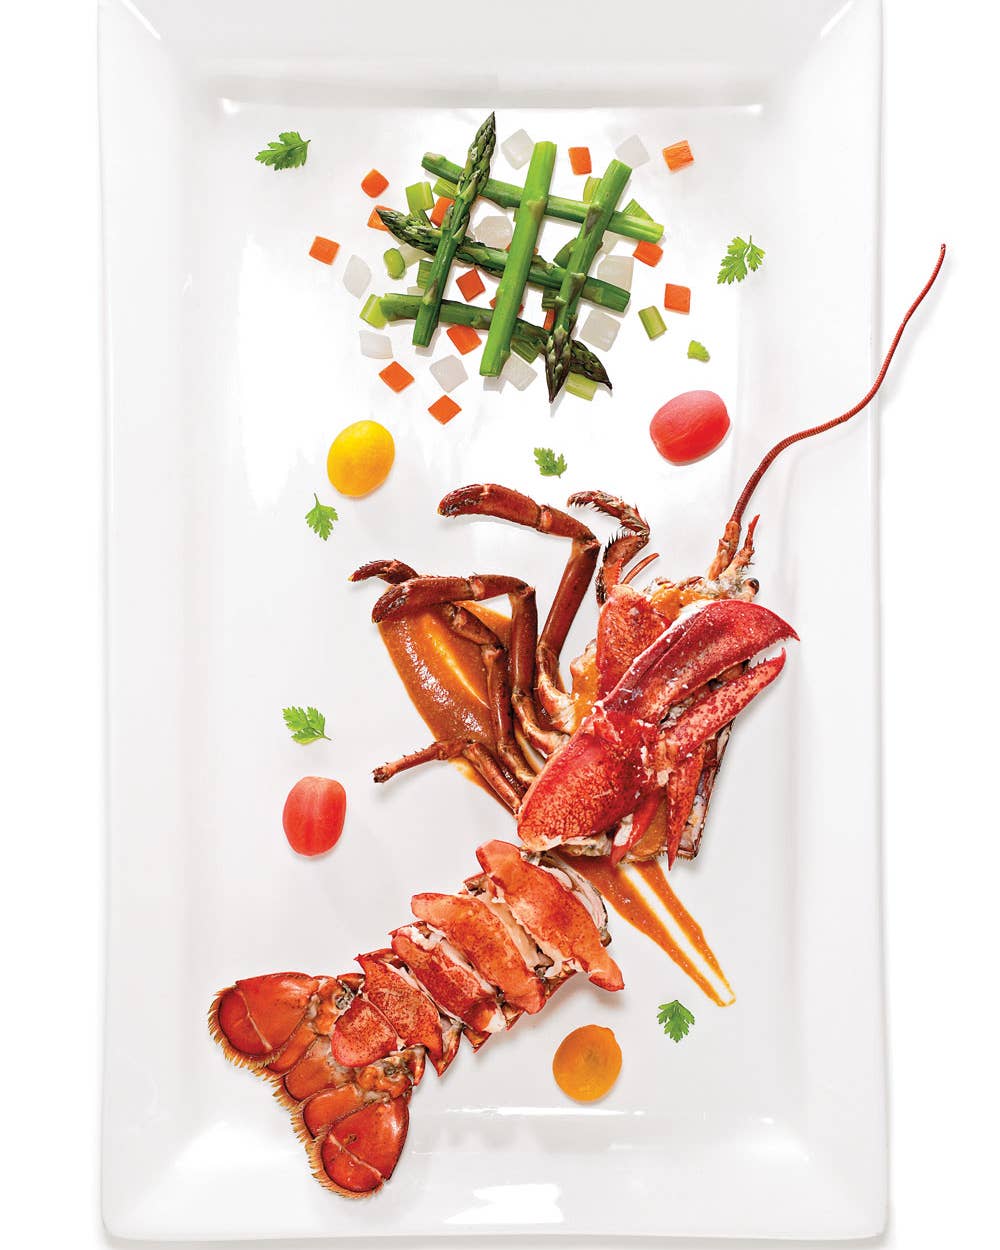 Lobster Américaine with Asparagus and Tomatoes